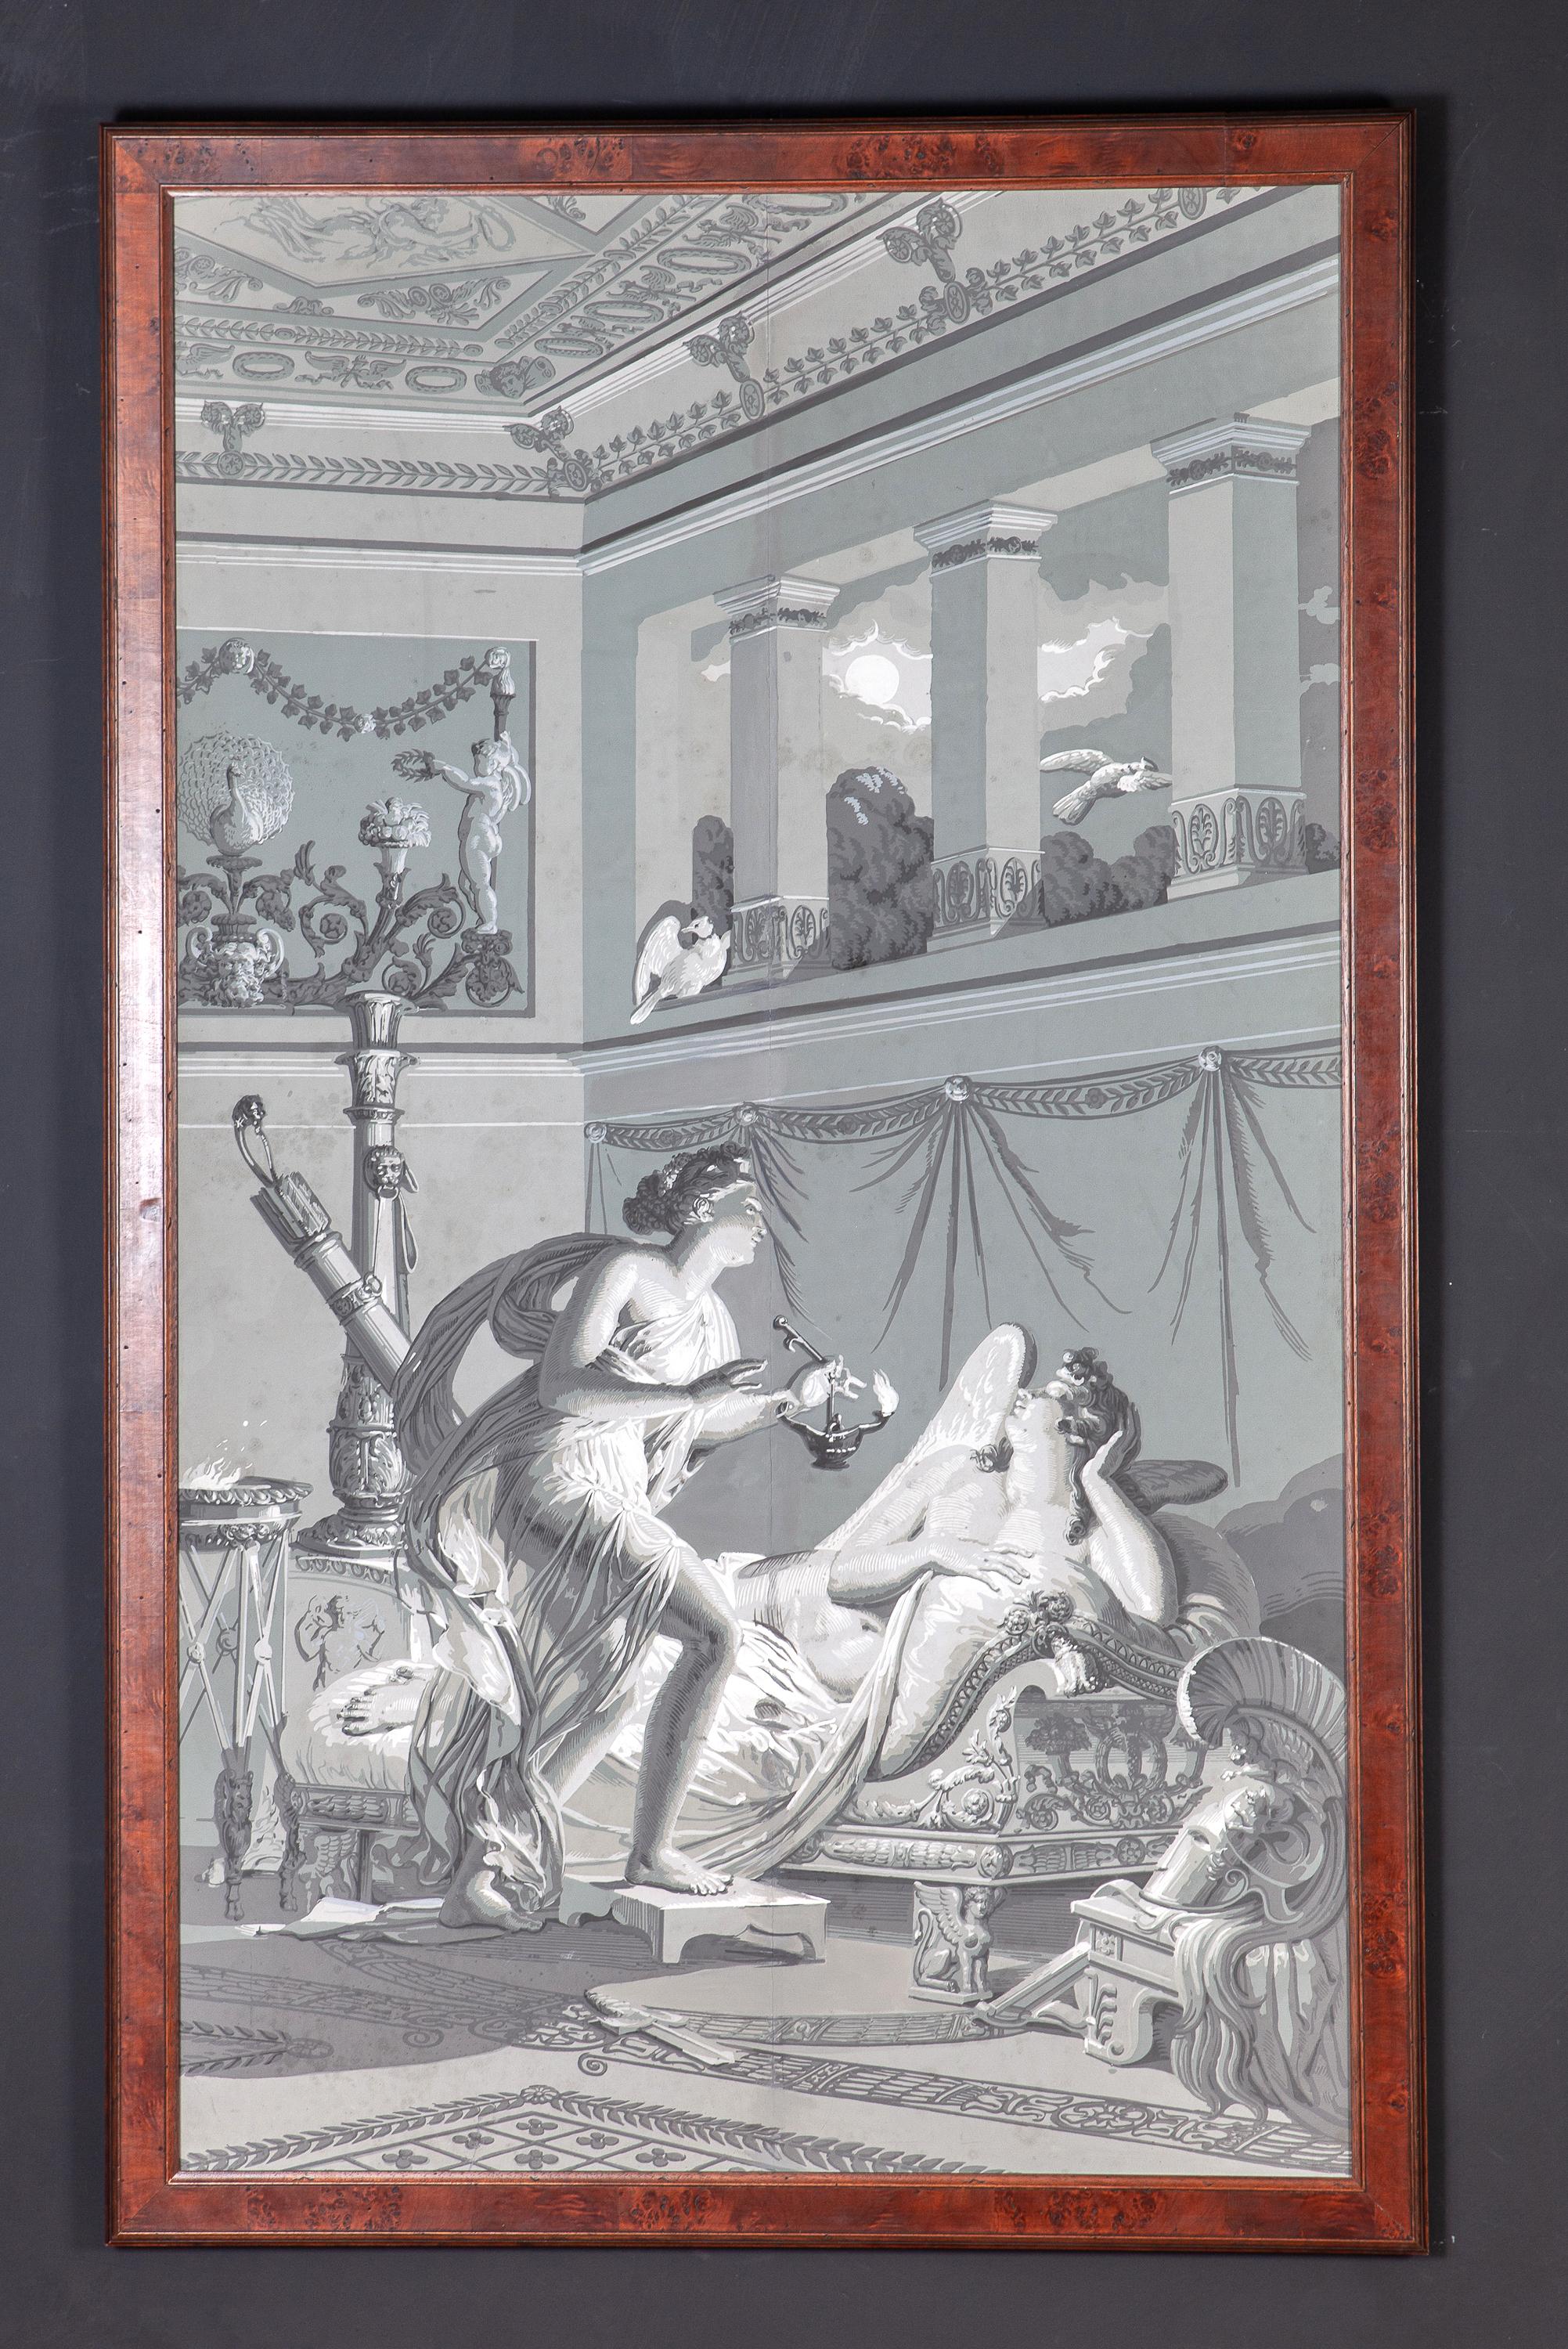 A fine pair of Papiers peints 'En Grisaille' from the psyche´ series manufactured by Dufour, Paris, after designs by Merry-Joseph Blondel and Louis Lafitte.
-'Psyche´ about to stab the sleeping cupid.'
-'Psyche´ returning from hades.